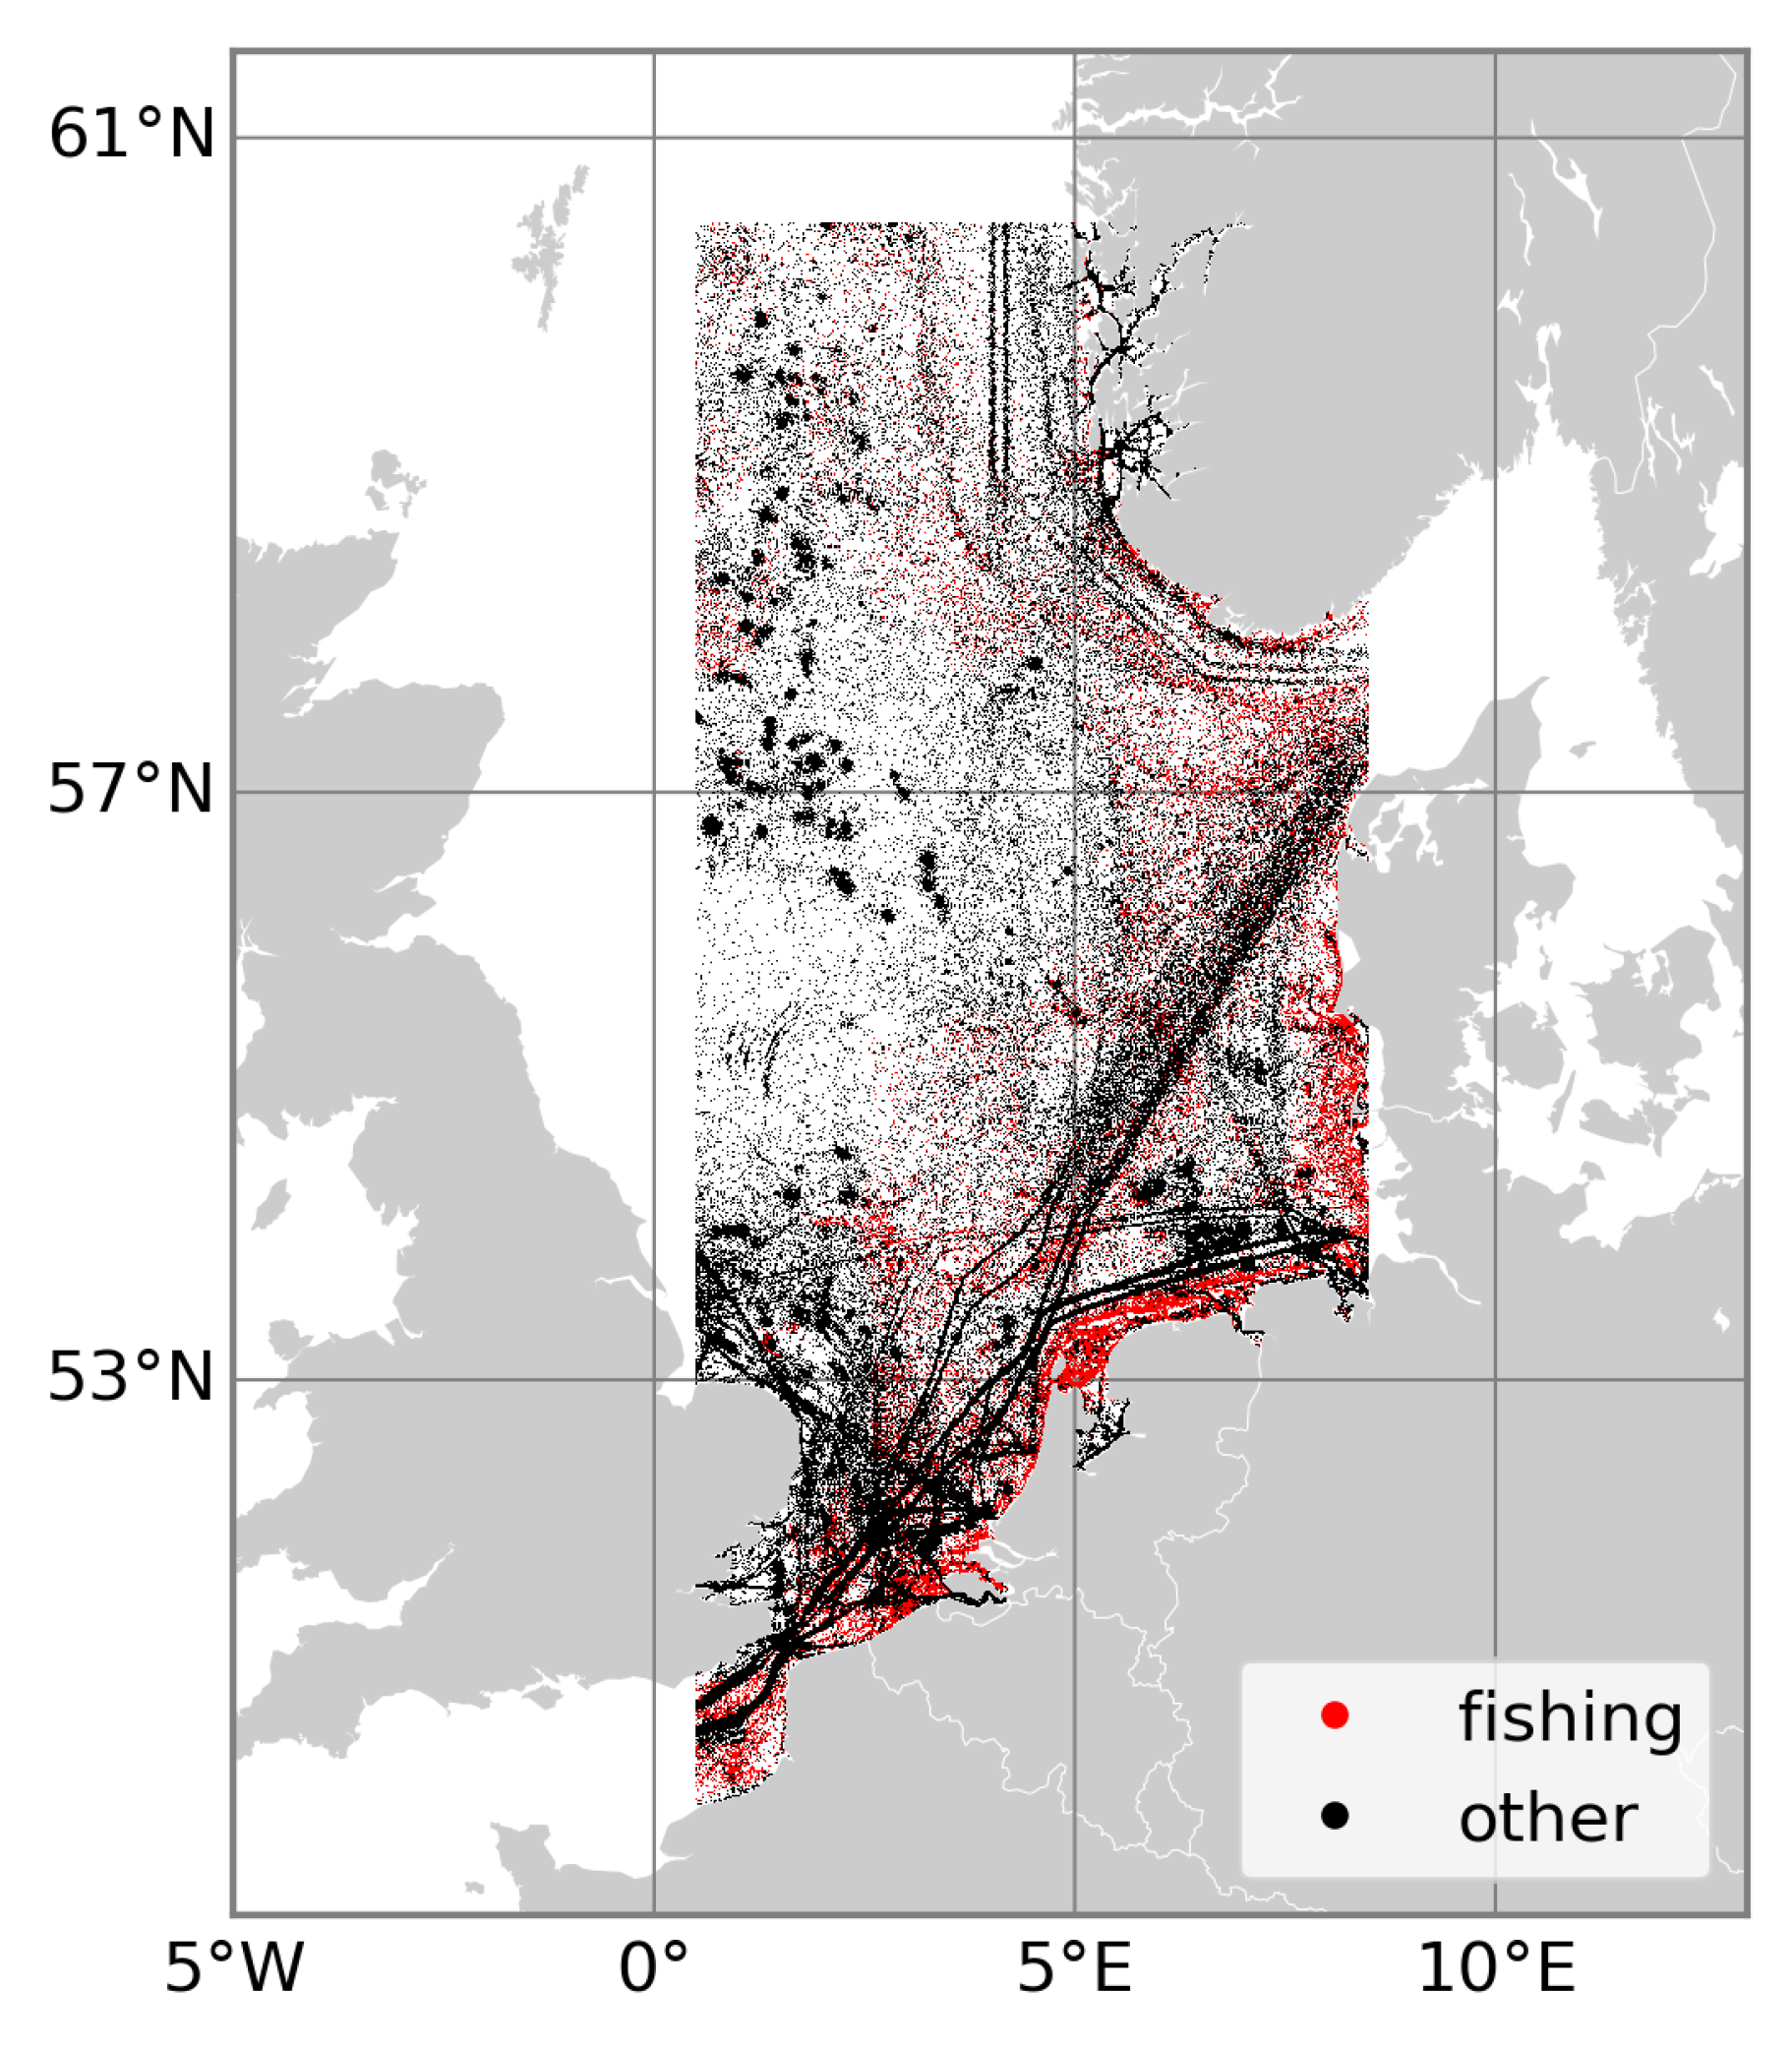 Remote Sensing | Free Full-Text | Maritime Vessel Classification to Monitor  Fisheries with SAR: Demonstration in the North Sea | HTML